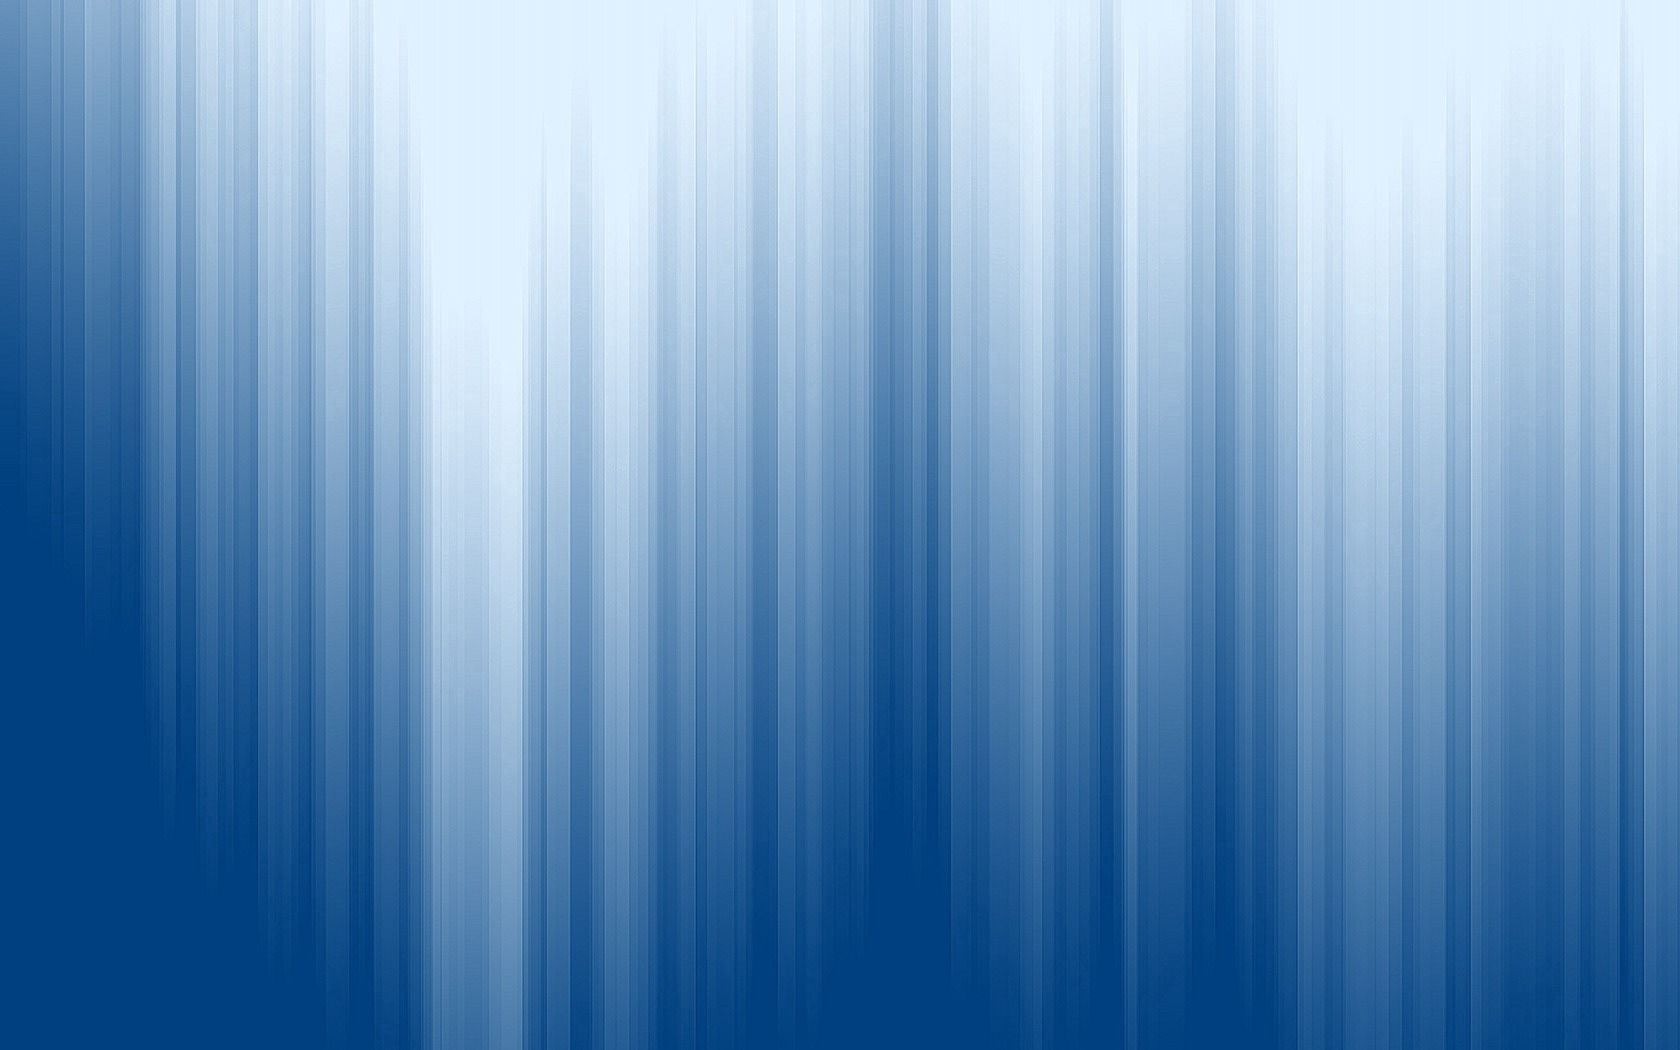 Cool Backgrounds minimalism, textures, blue, texture Lines